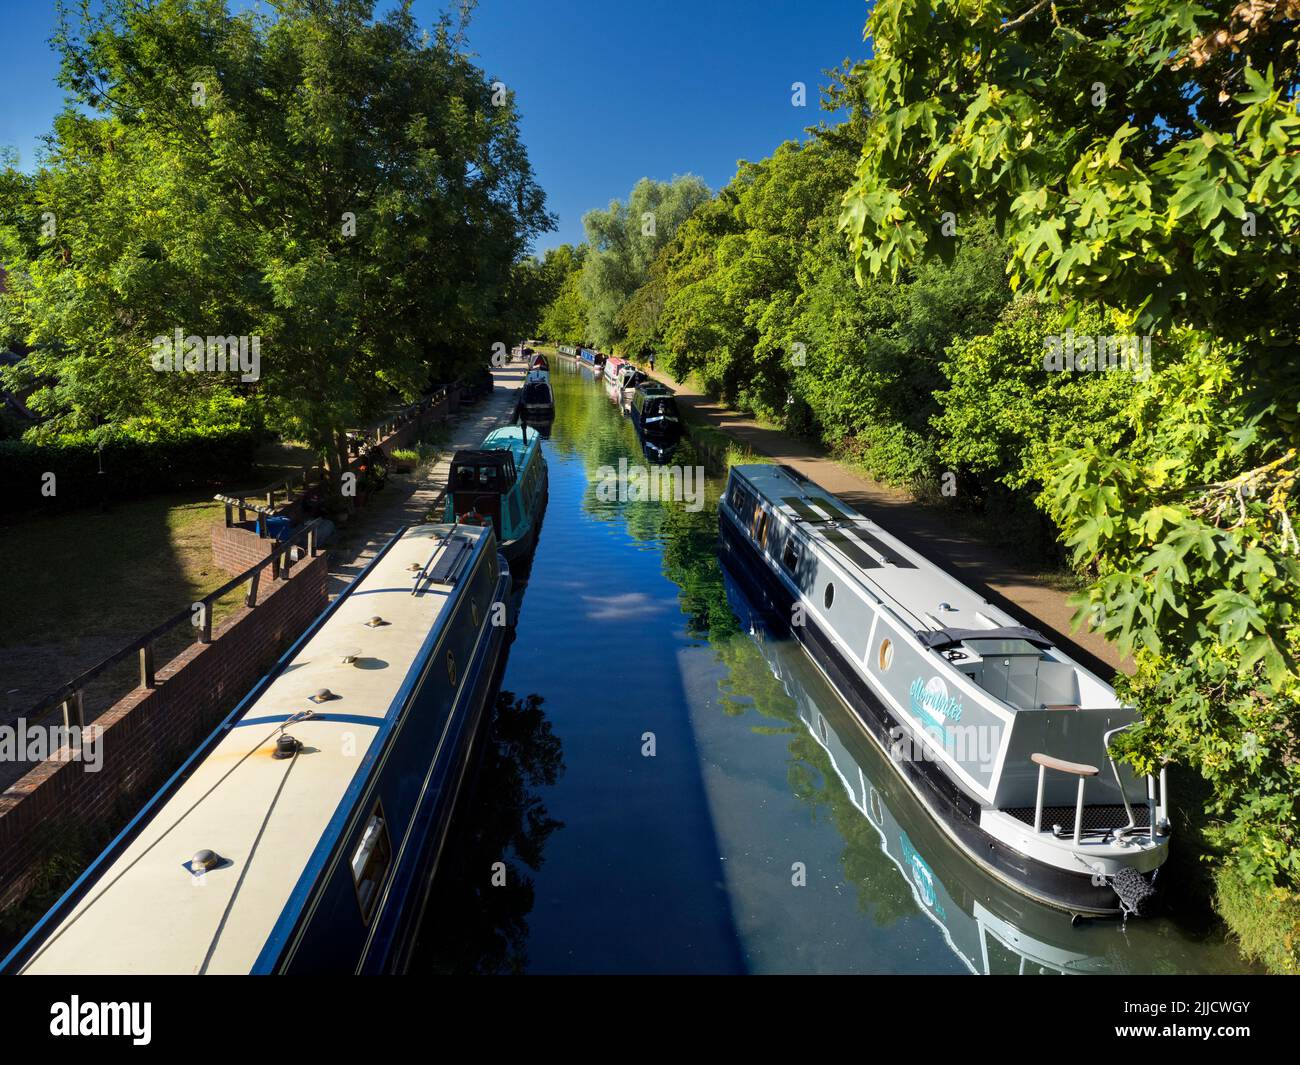 Puttering around on houseboats is a quintessentially English leisure tradition. Oxford's waterways, canals, streams and rivers are a source of many tr Stock Photo